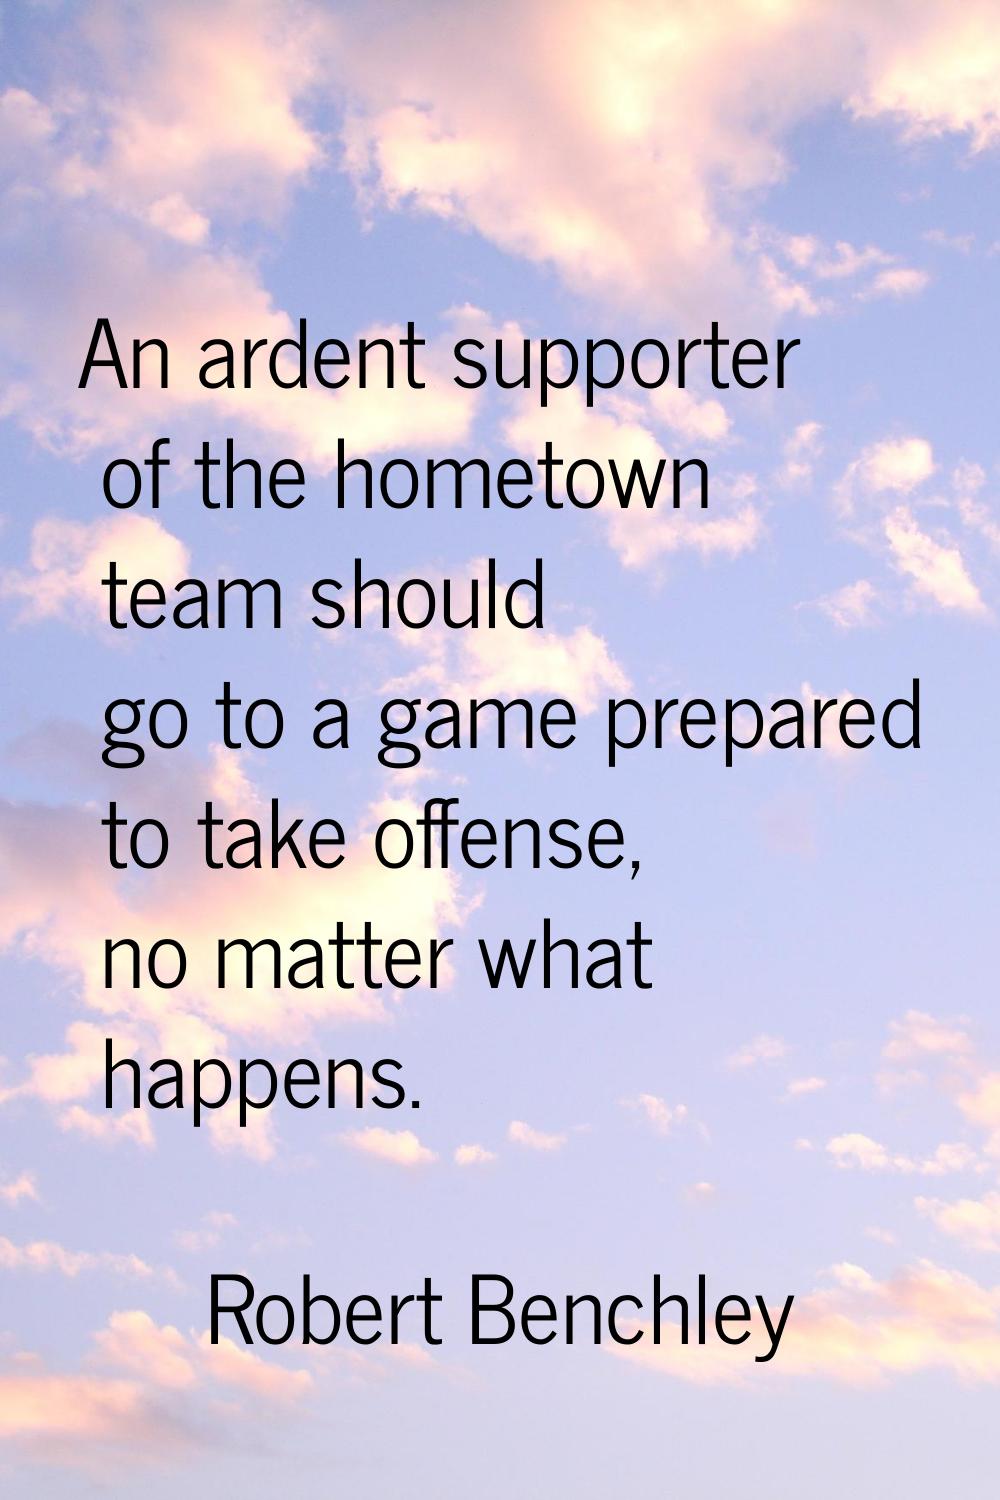 An ardent supporter of the hometown team should go to a game prepared to take offense, no matter wh